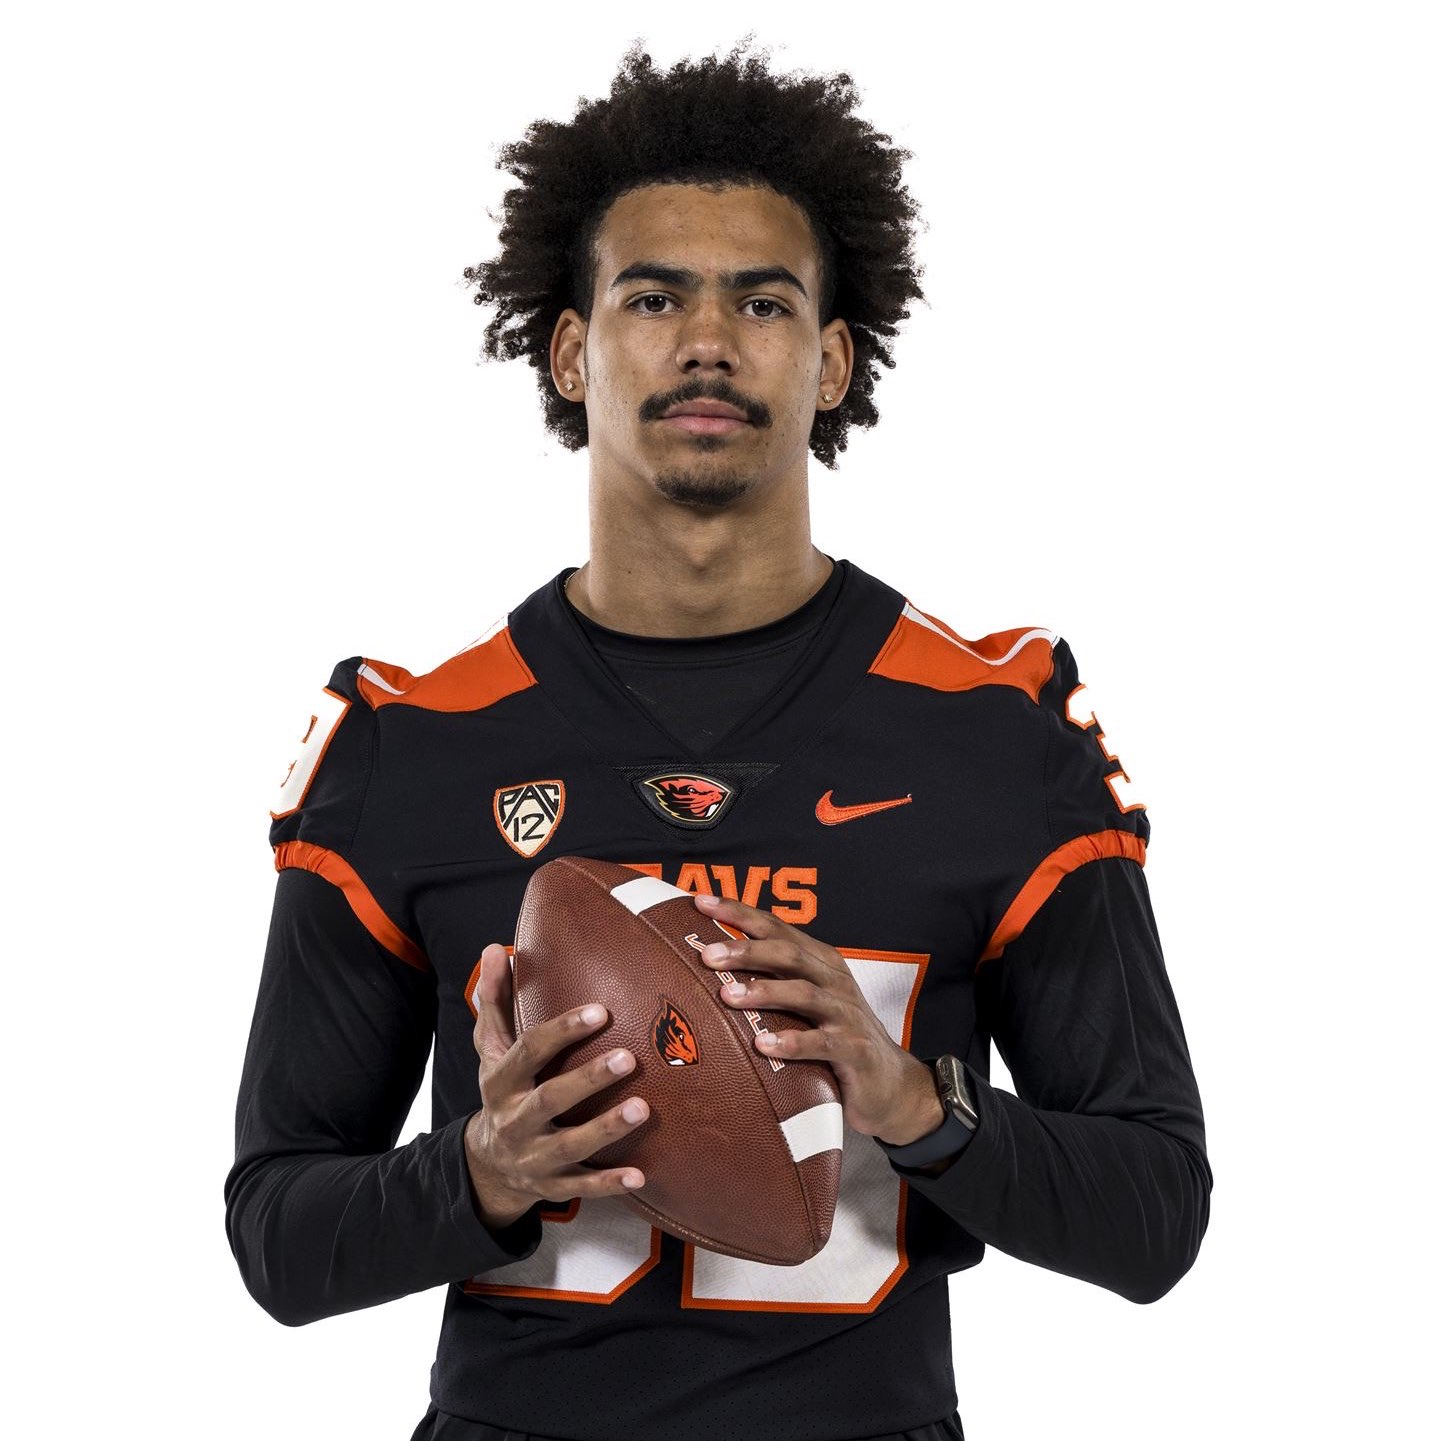 The Official Oregon State Beavers Marketplace for NIL Deals - Opendorse